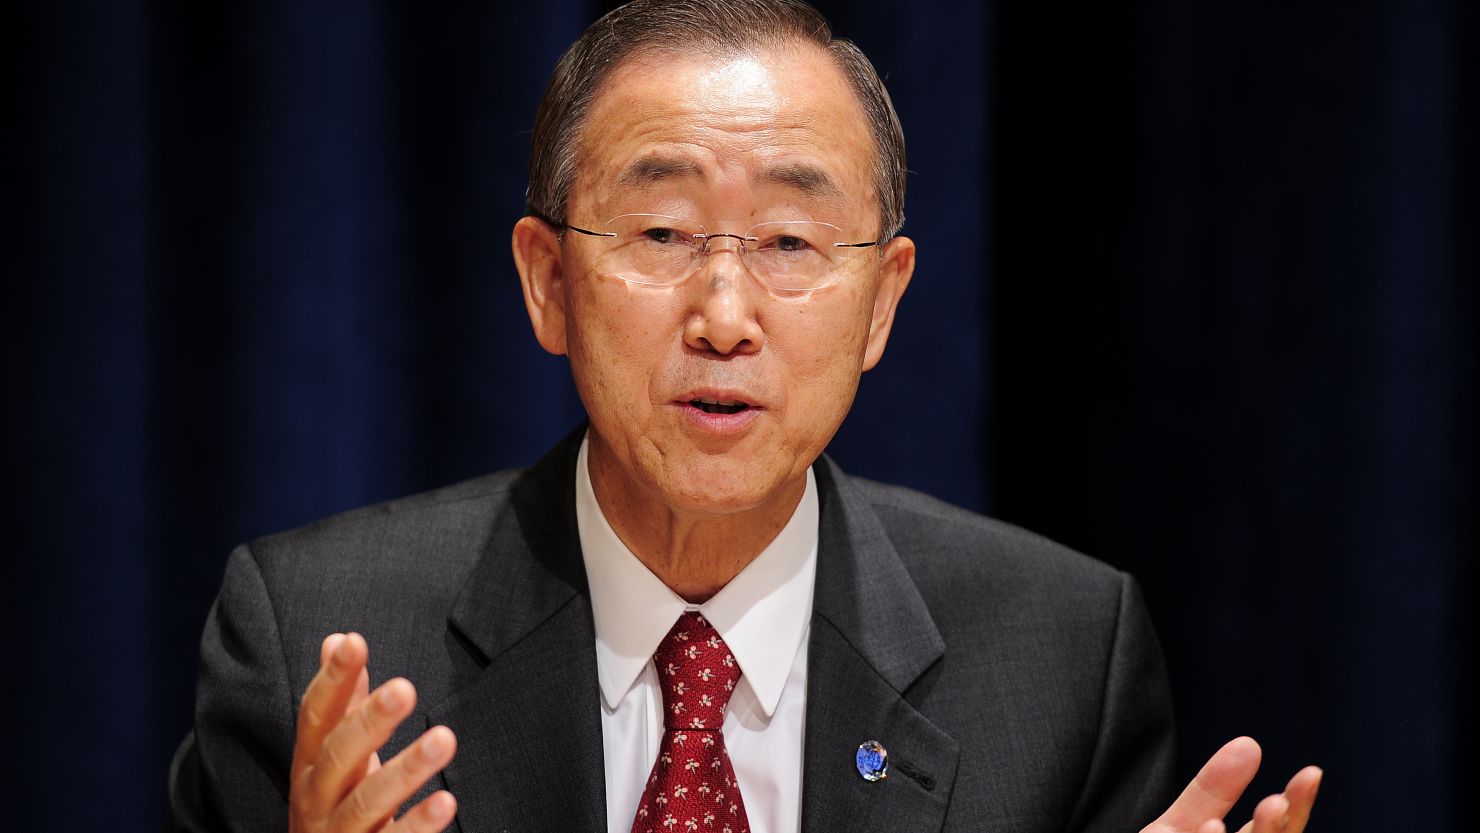 U.N. Secretary-General Ban Ki-moon called governments to make a broader climate agreement possible in the future.